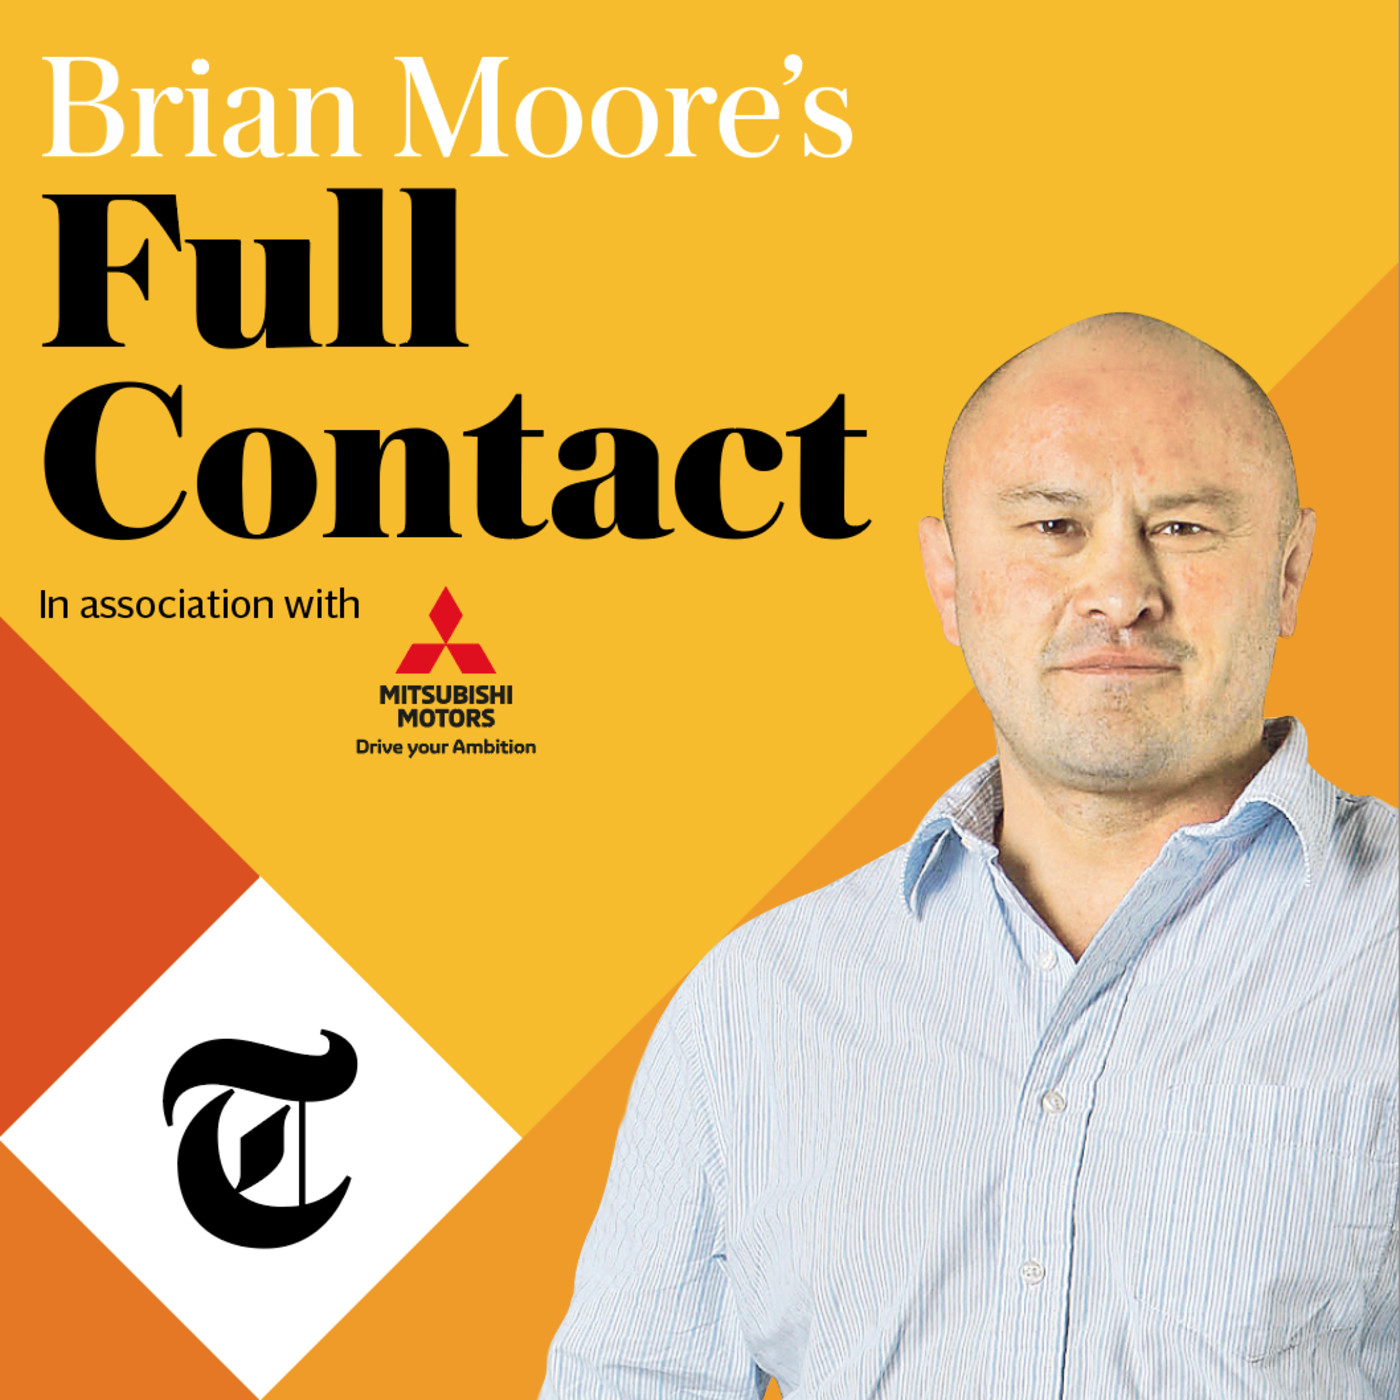 Episode 11: Brian Moore's Full Contact